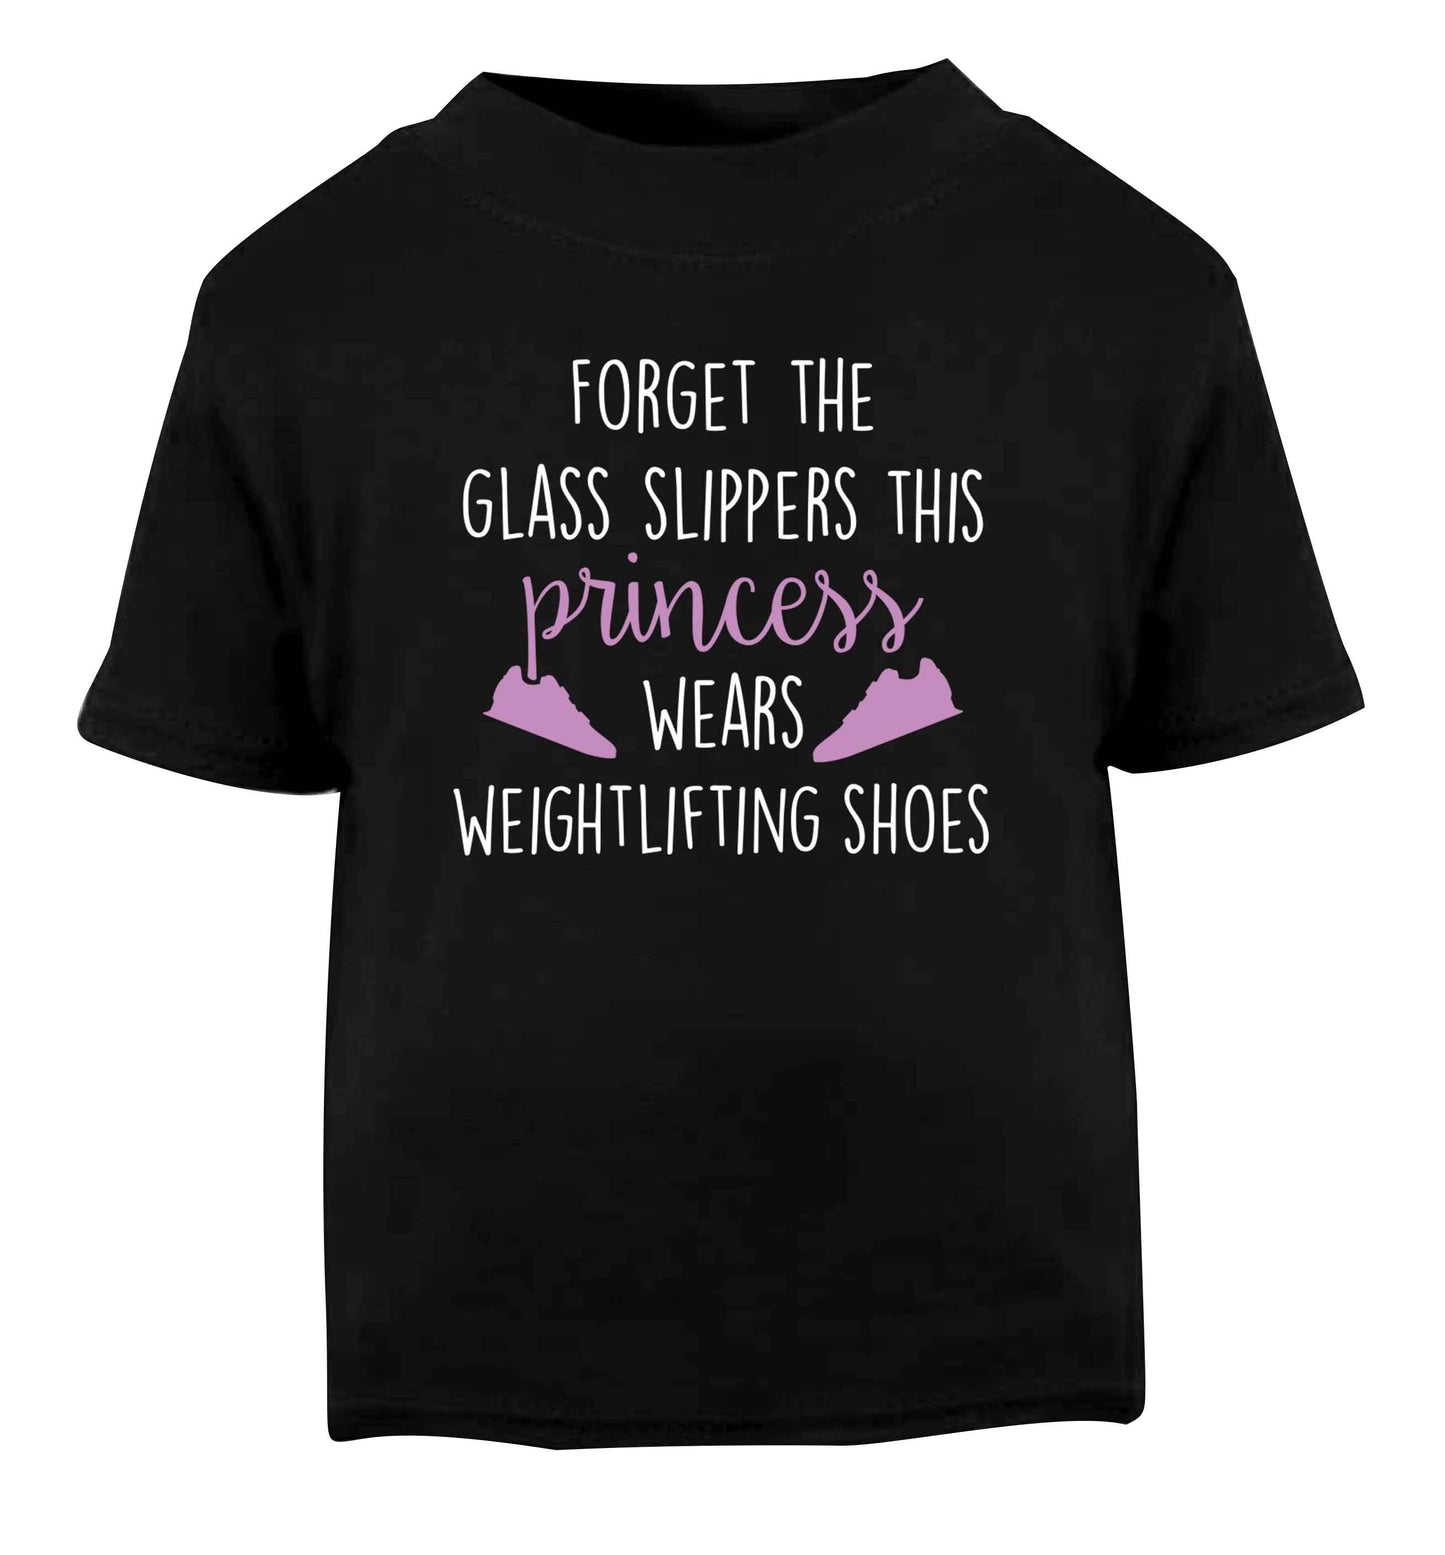 Forget the glass slippers this princess wears weightlifting shoes Black Baby Toddler Tshirt 2 years